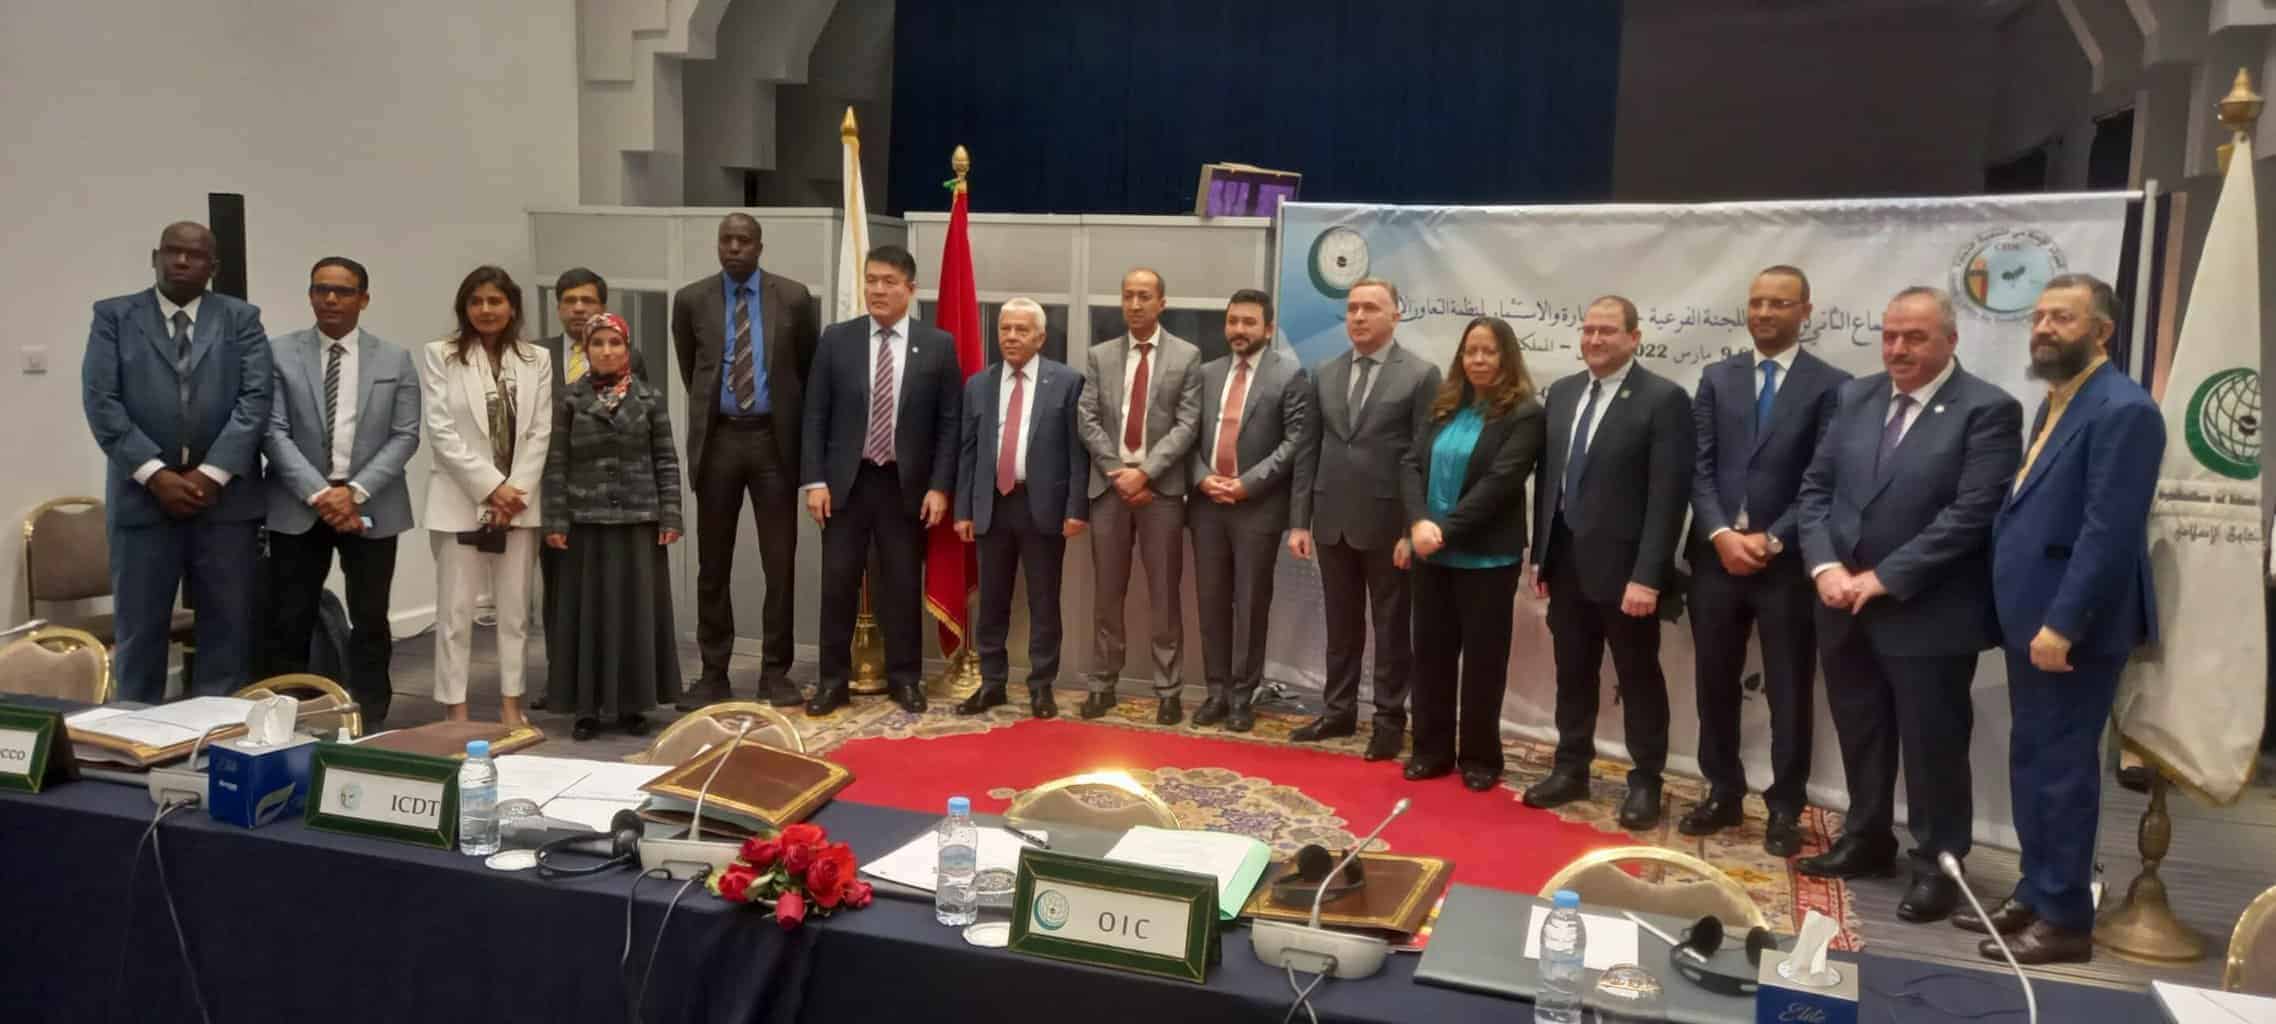 2nd Trade and Investment Sub-Committee Leaders’ Meeting on 08-09 March 2022 in Marrakesh, Kingdom of Morocco.